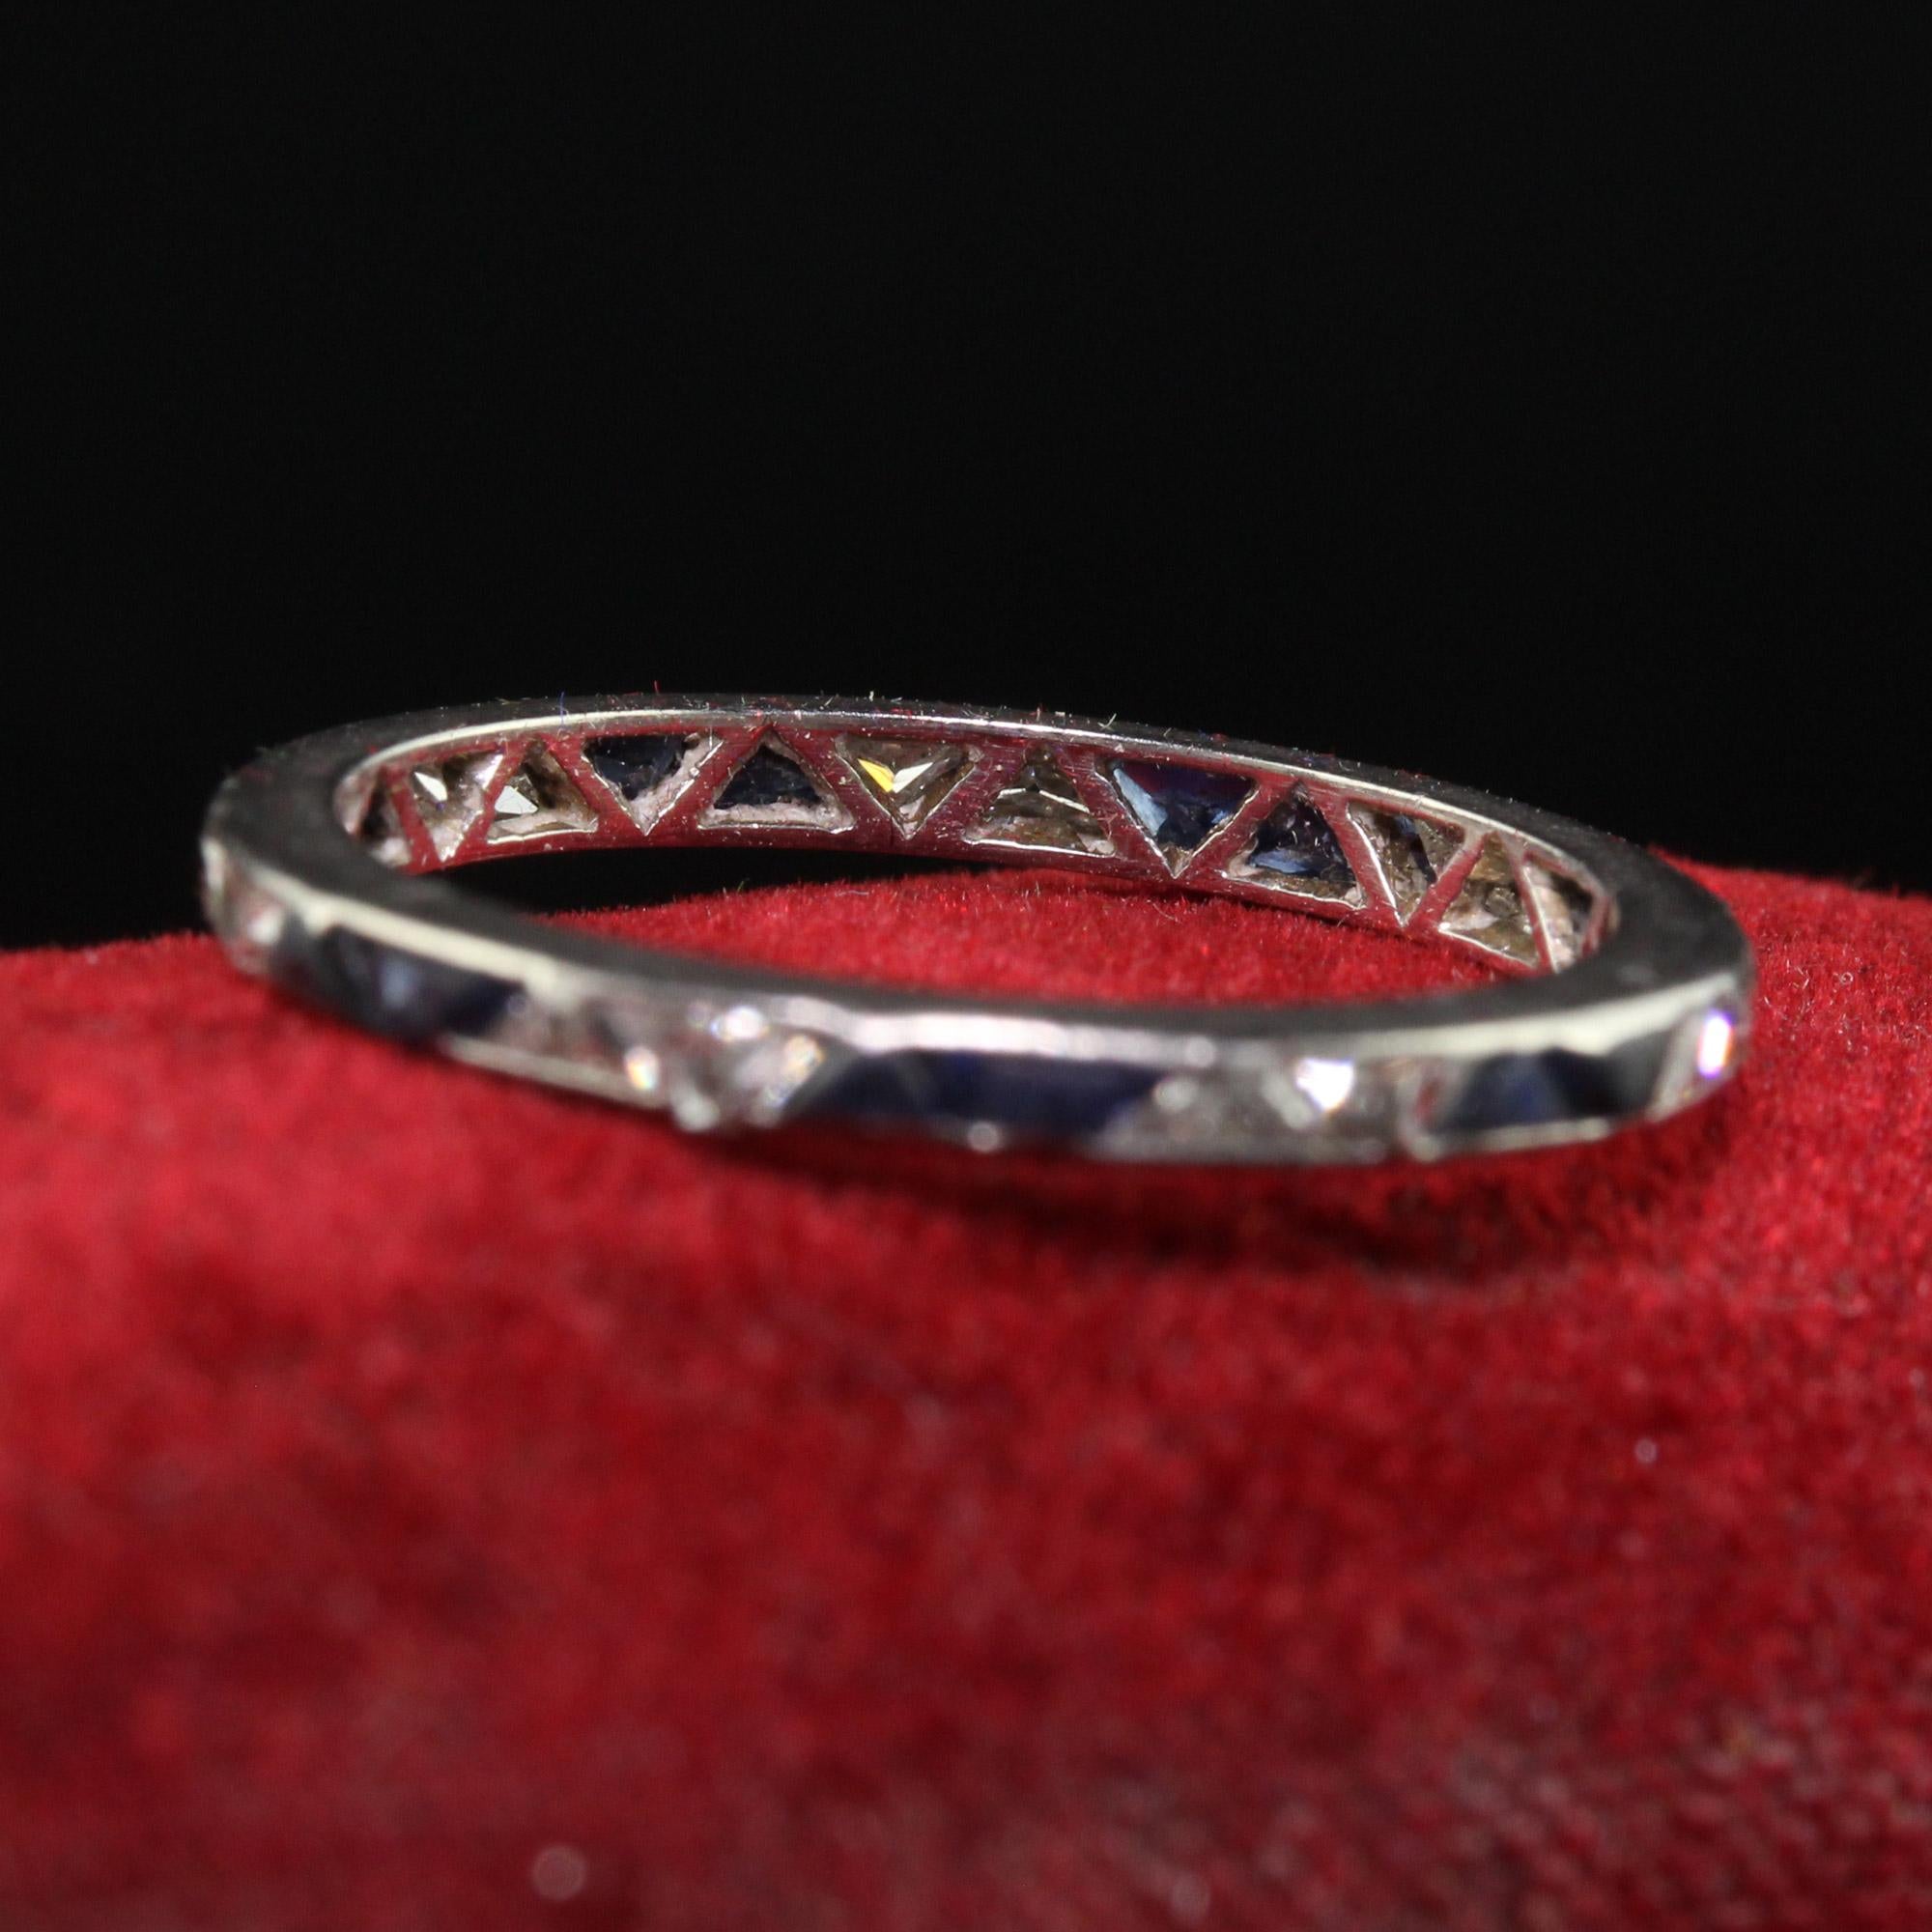 Beautiful Antique Art Deco Platinum Trillion Cut Diamond and Sapphire Eternity Band. This amazing eternity band is crafted in platinum. This band has trillion cut diamonds and sapphires alternating around the entire ring. The ring is in good